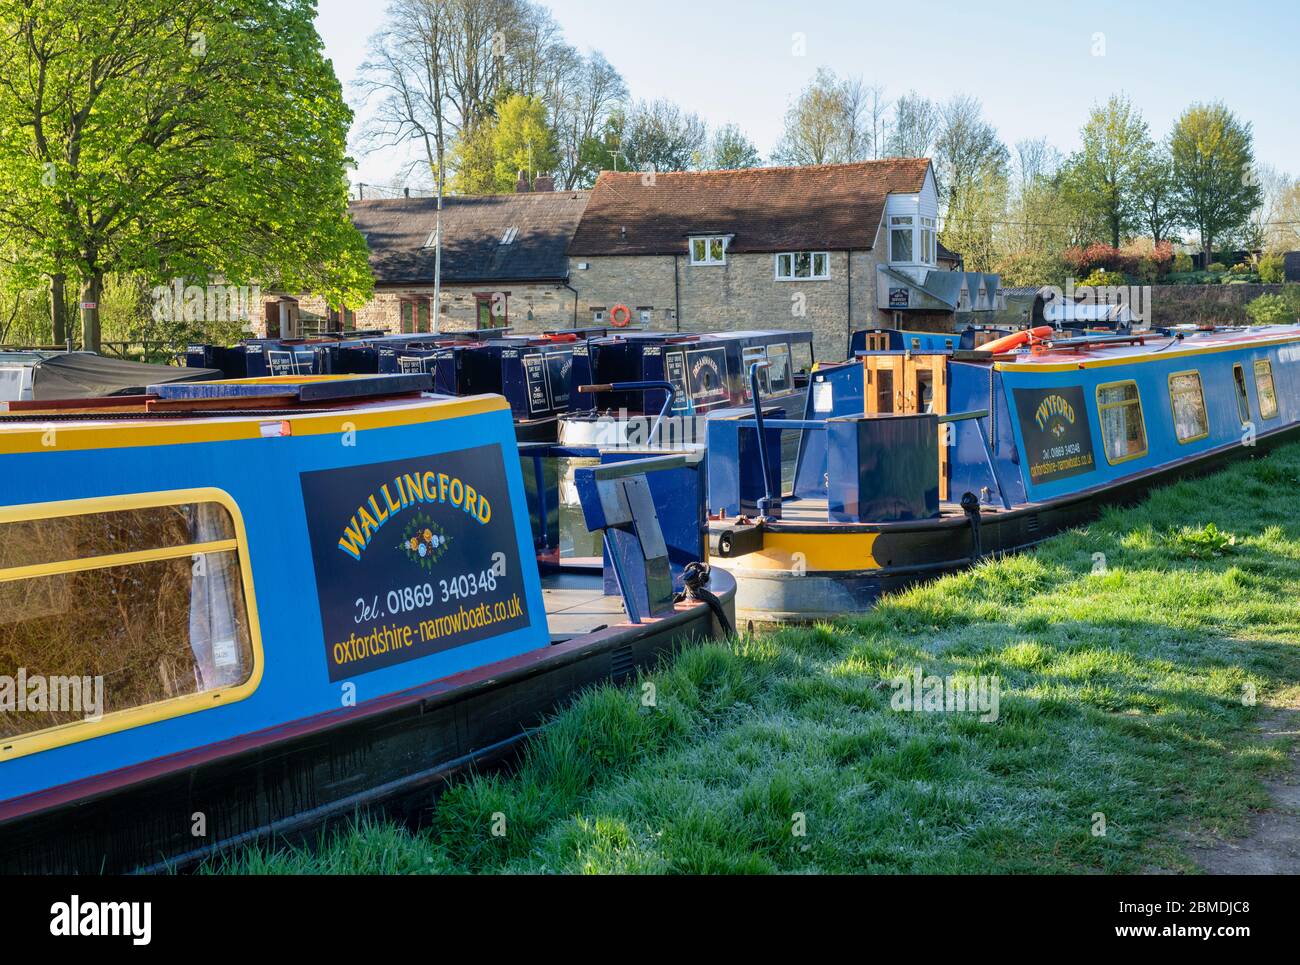 Narrowboats on the oxford canal early morning in spring. Heyford Wharf, Lower Heyford, Bicester, Oxfordshire, England Stock Photo